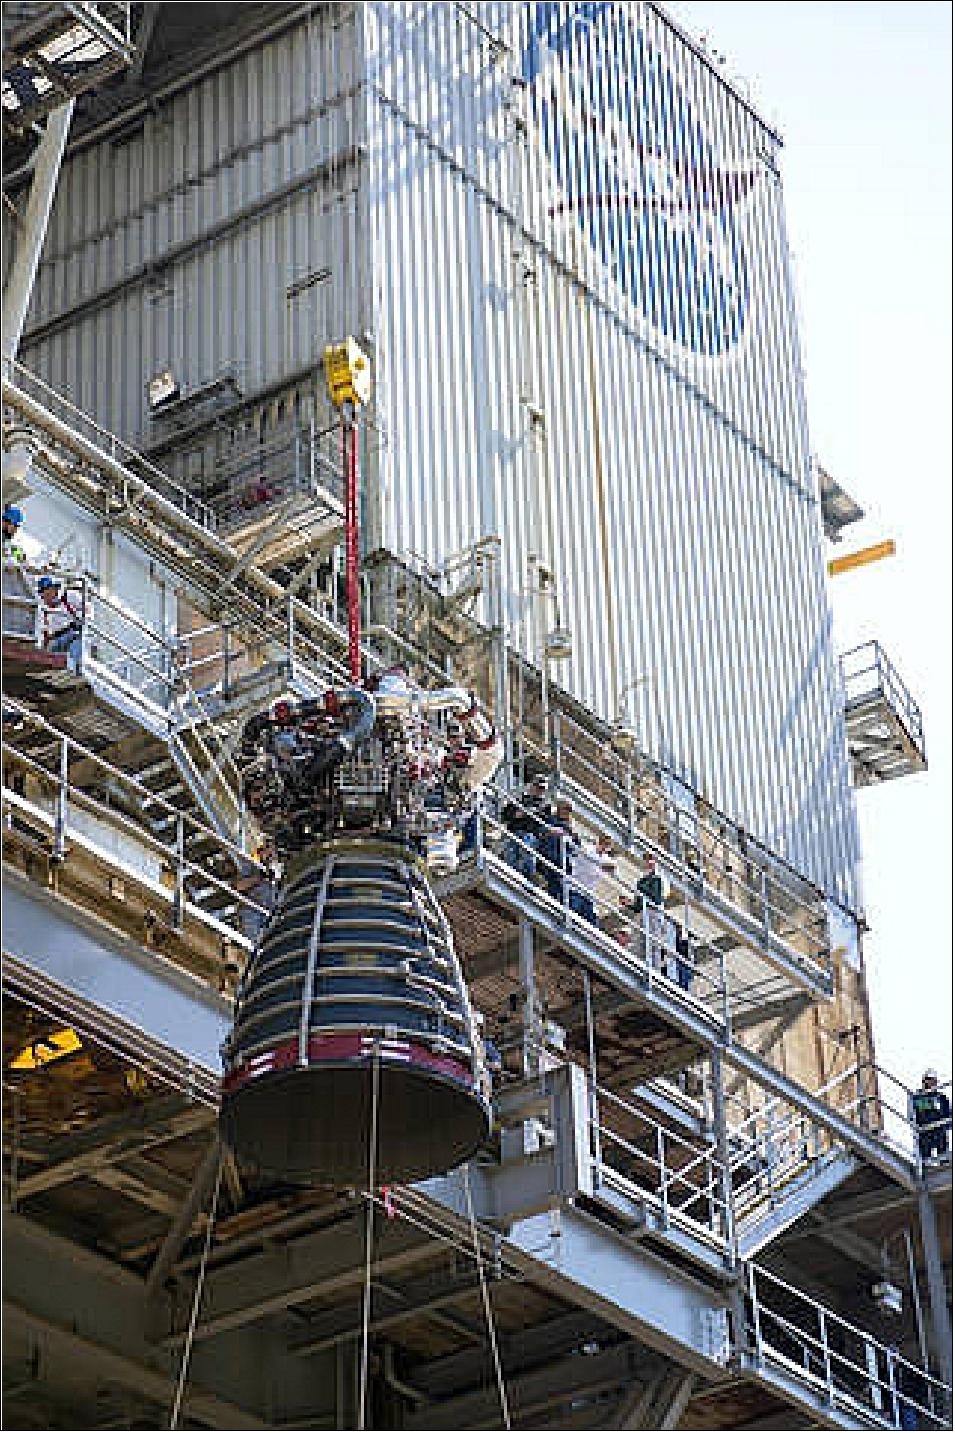 Figure 37: RS-25 flight engine No. 2062 is lifted onto the A-1 Test Stand at NASA’s Stennis Space Center near Bay St. Louis, Miss. The Aerojet Rocketdyne-built engine was delivered to the stand March 20 and test fired April 4 (image credit: NASA/SSC)